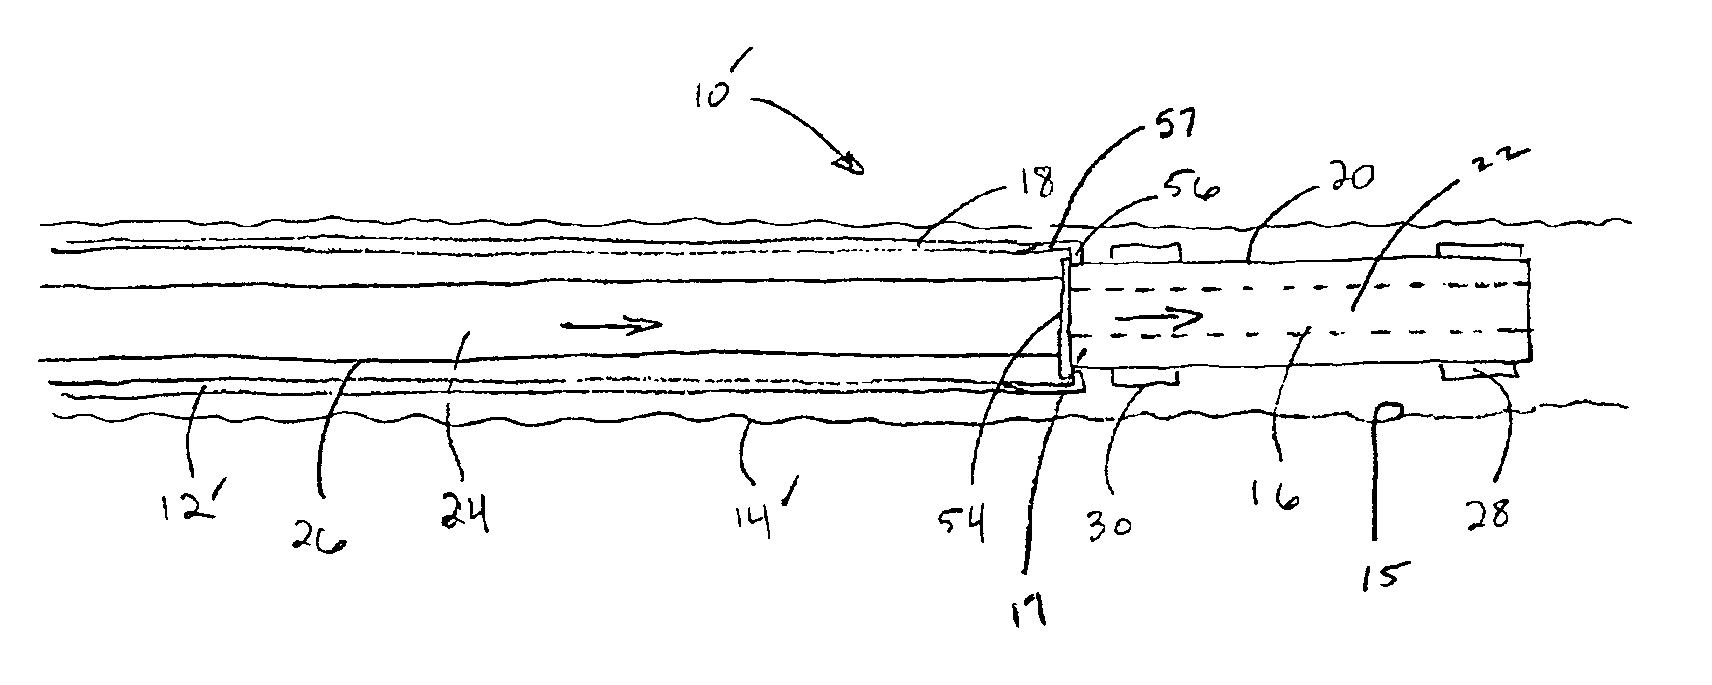 Apparatus and methods for installing casing in a borehole